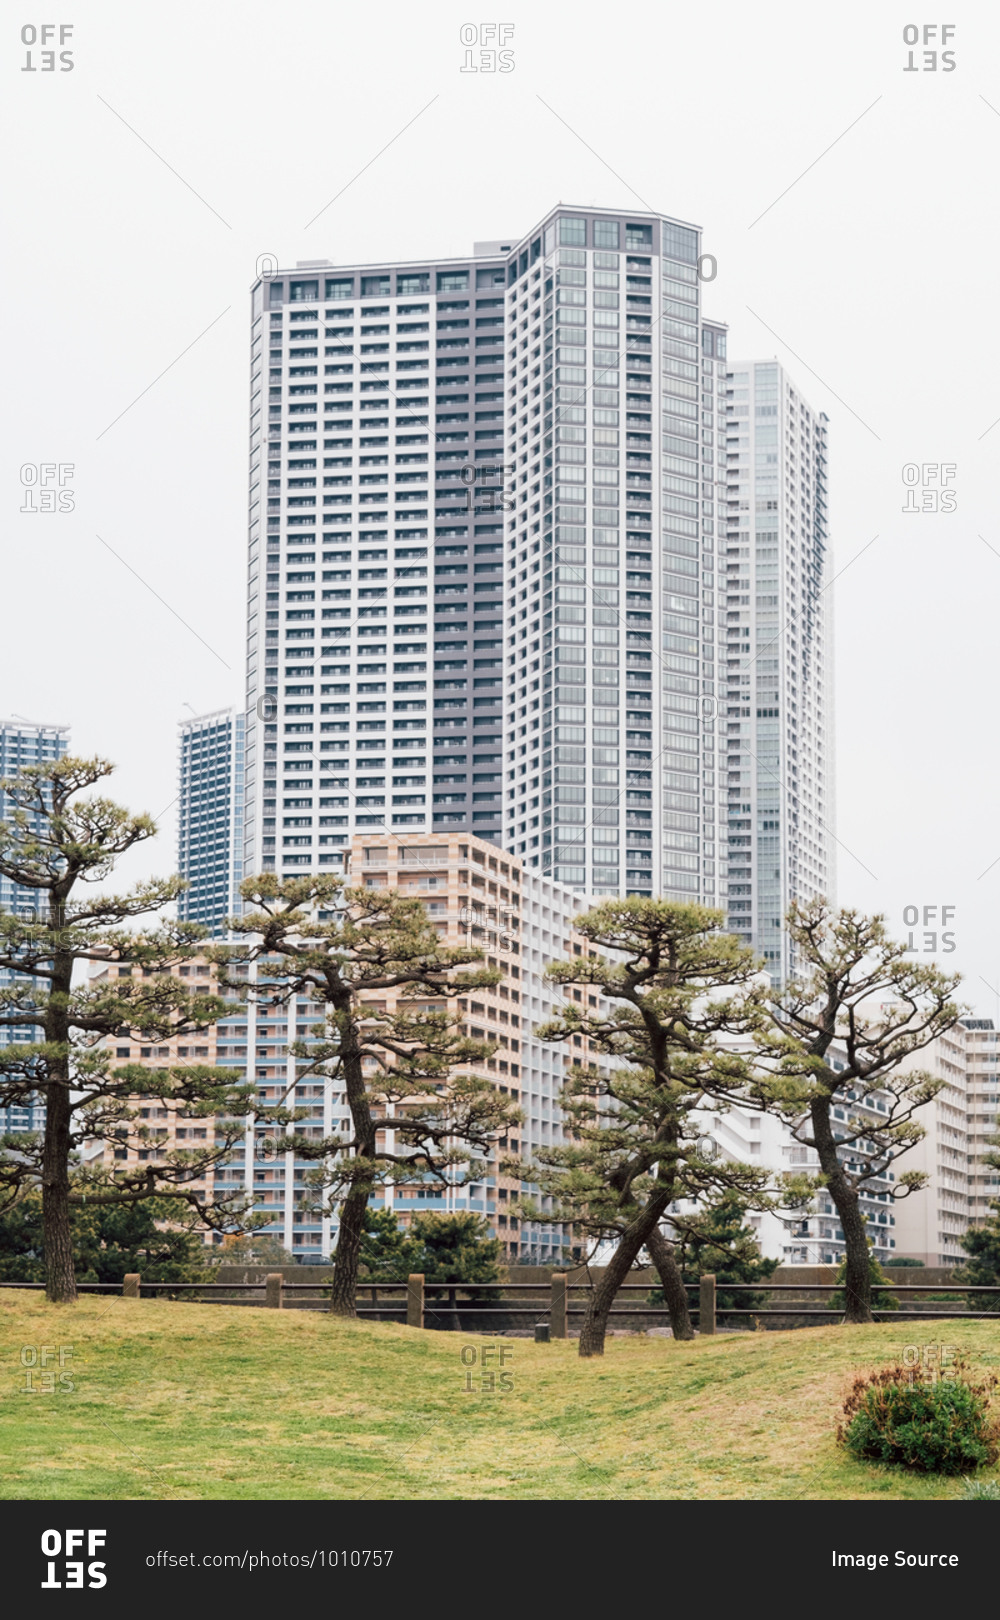 Large Bonsai trees in park, high-rise buildings in background, Tokyo, Japan